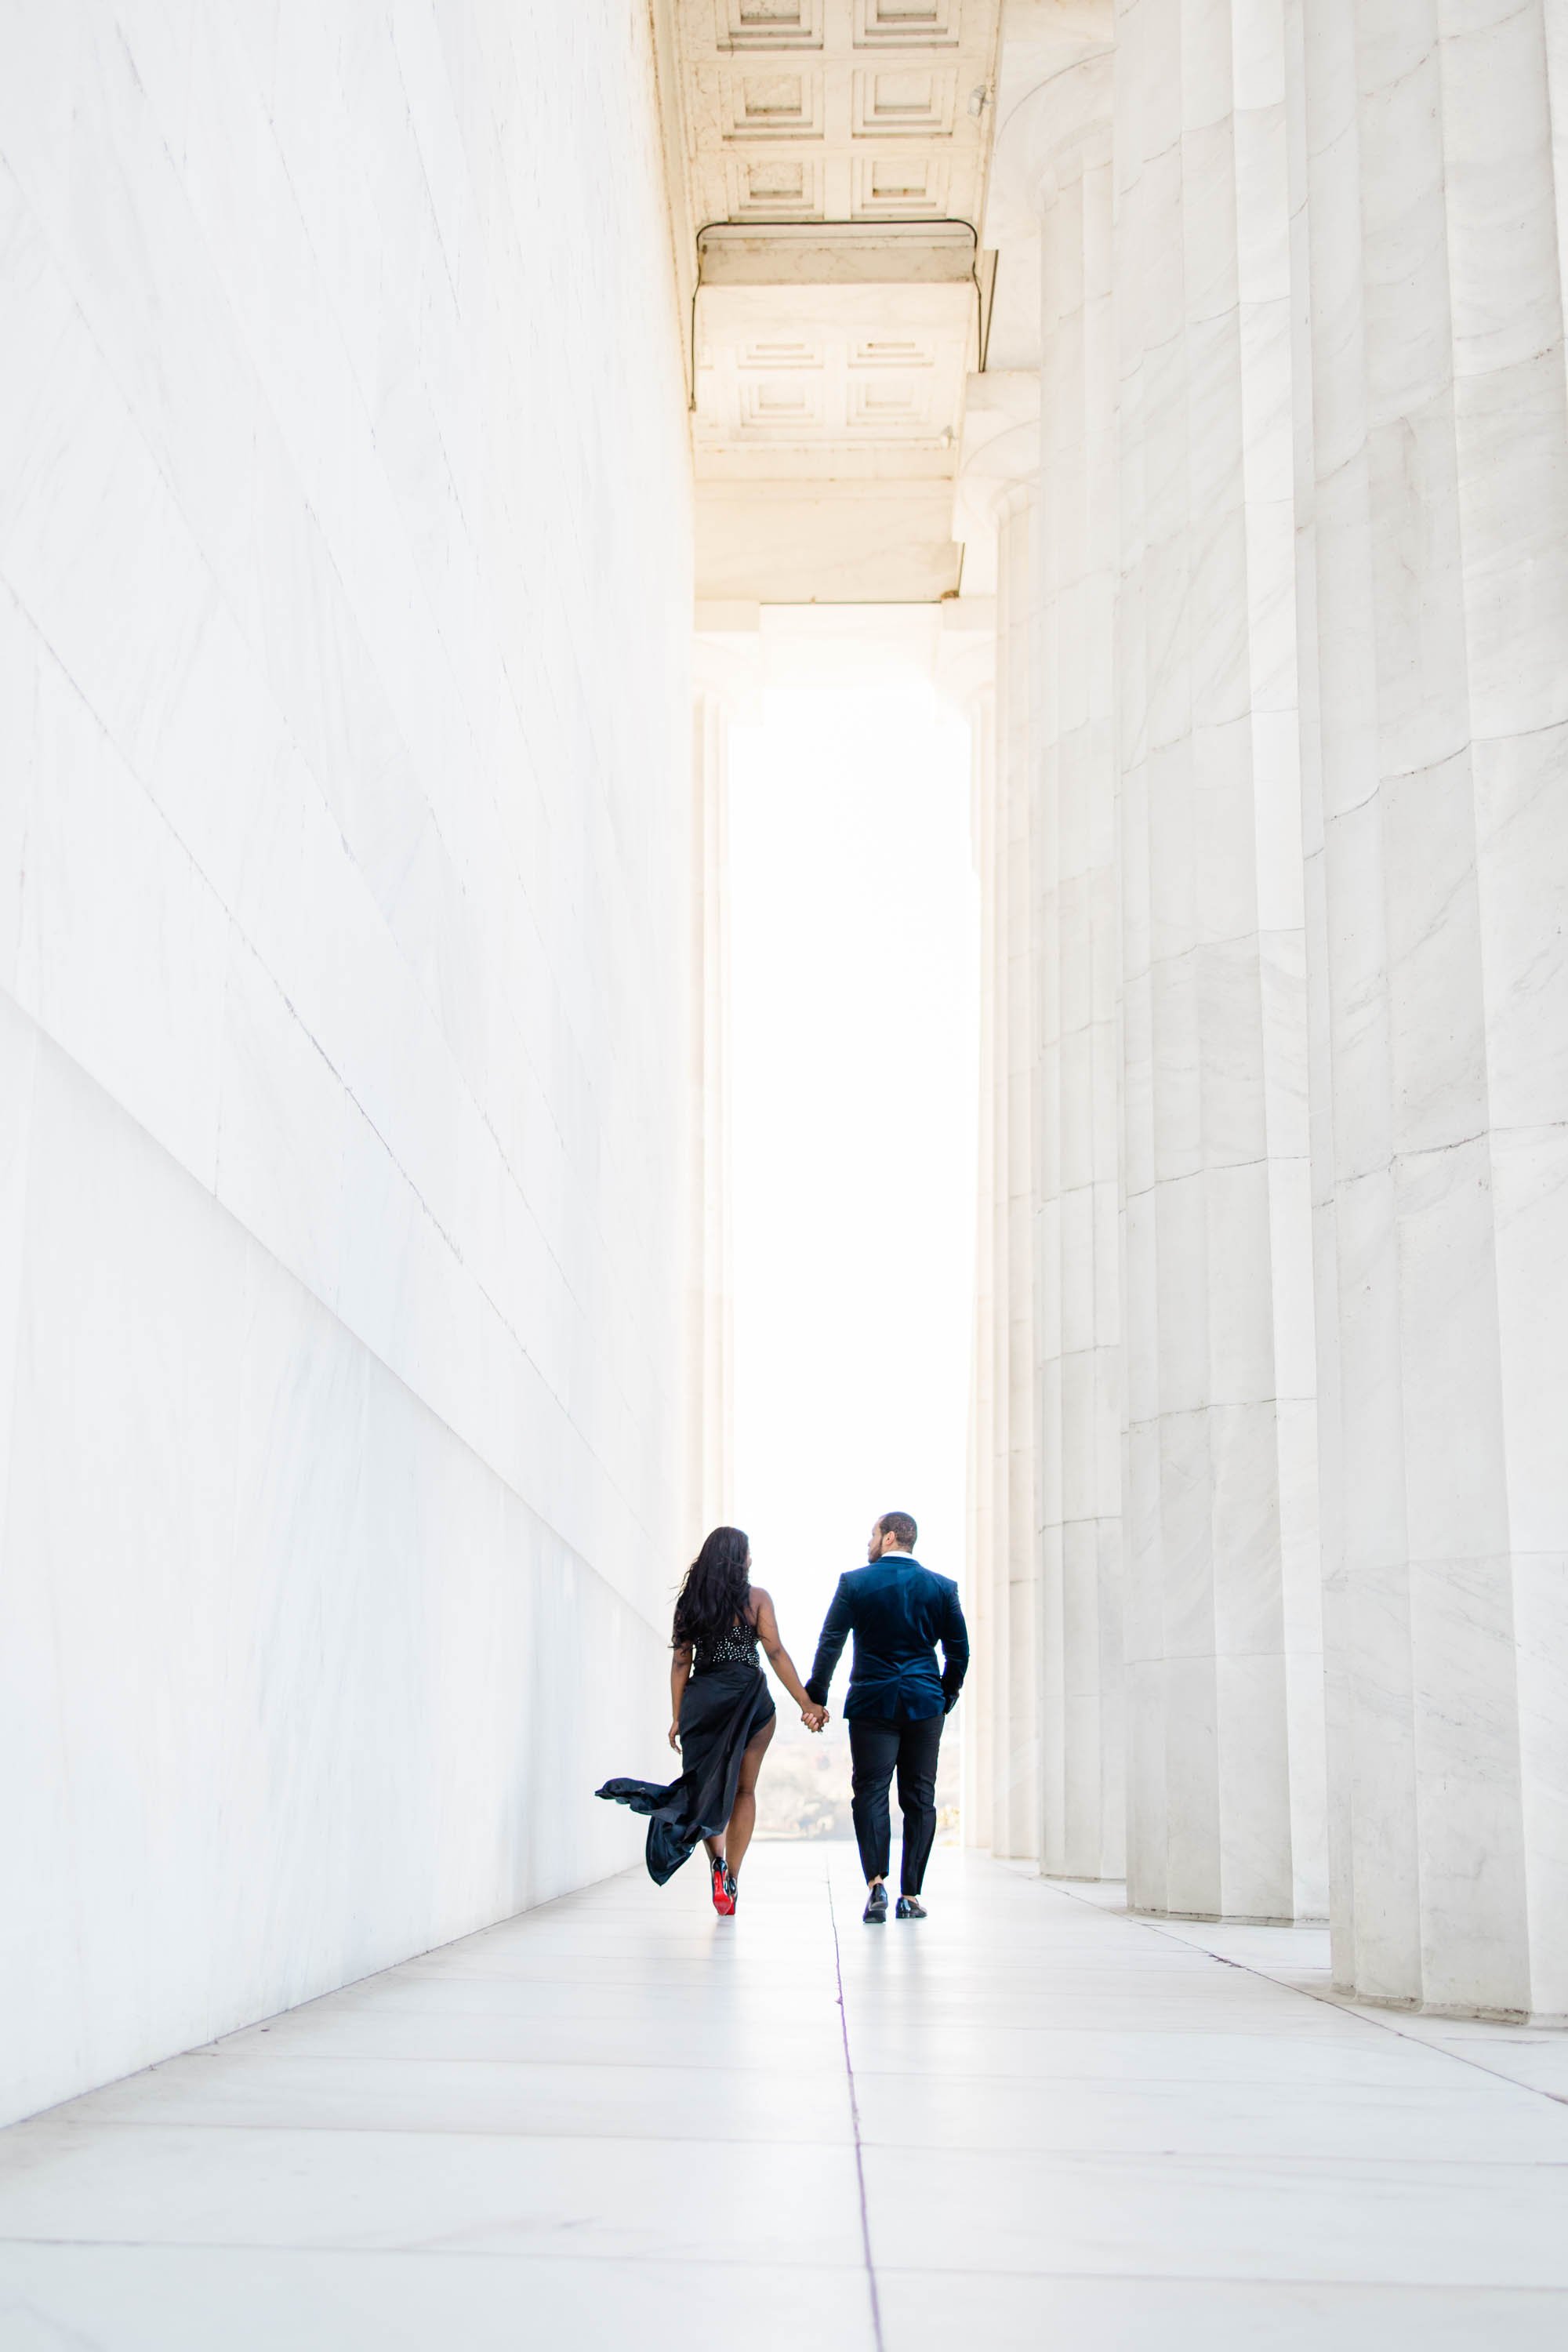 Top DC Engagement Session with Black Orchid Events Couple shot by Megapixels Media at the Lincoln Memorial-5.jpg